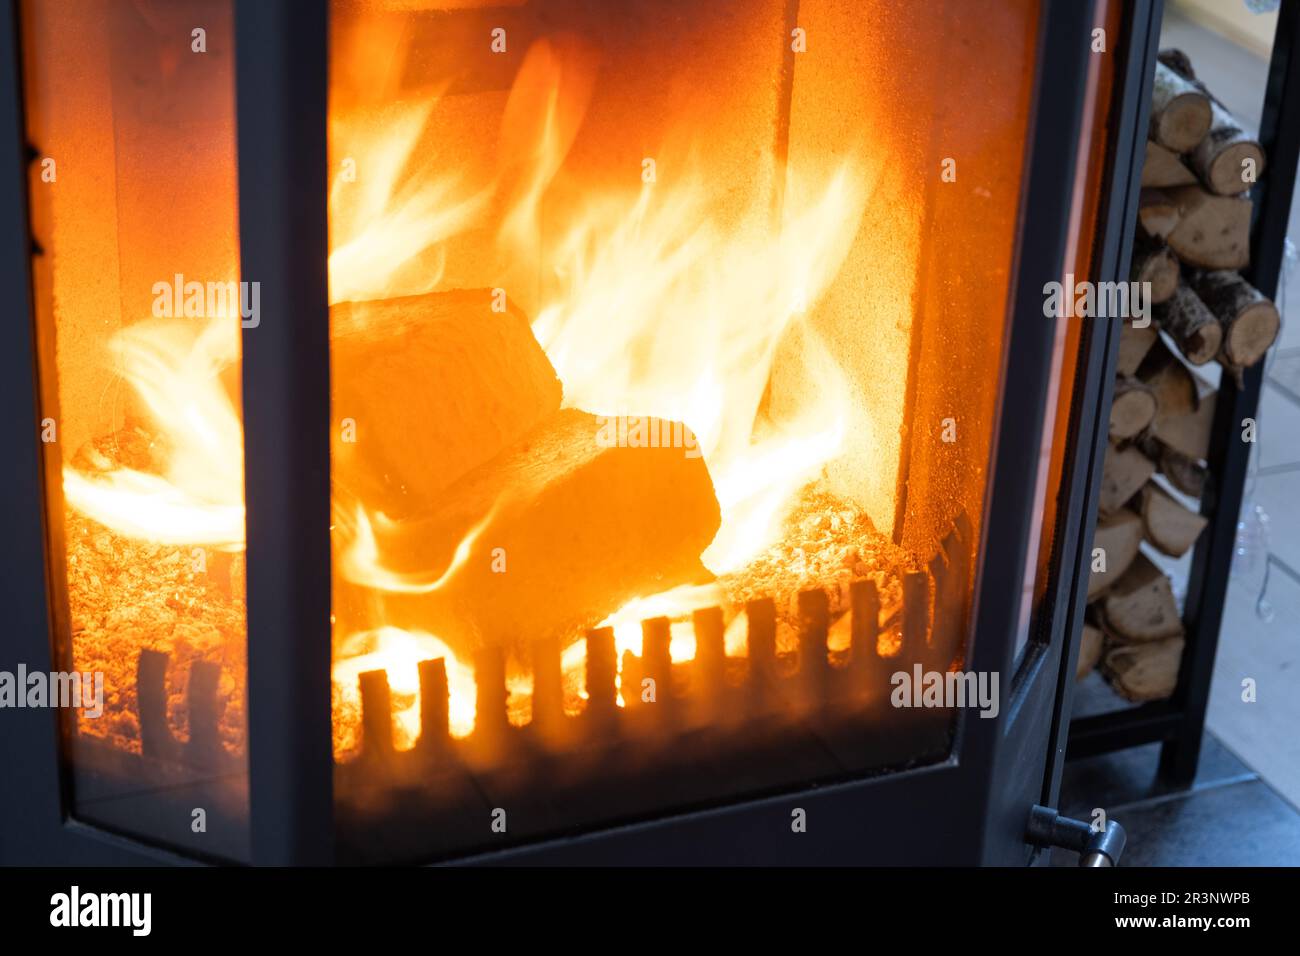 Fuel briquettes made of pressed sawdust for kindling the furnace - economical alternative eco-friendly fuel for the fireplace in Stock Photo